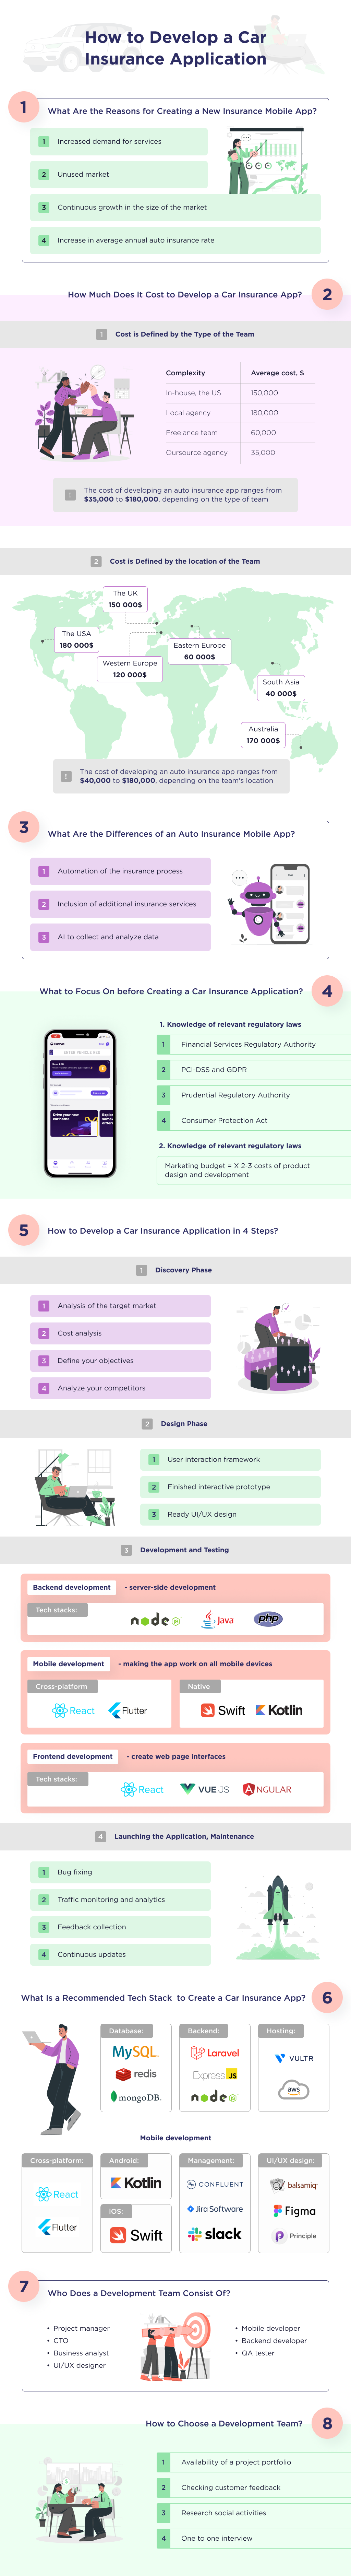 The basic steps to help develop an auto insurance app, and describes the cost required to develop